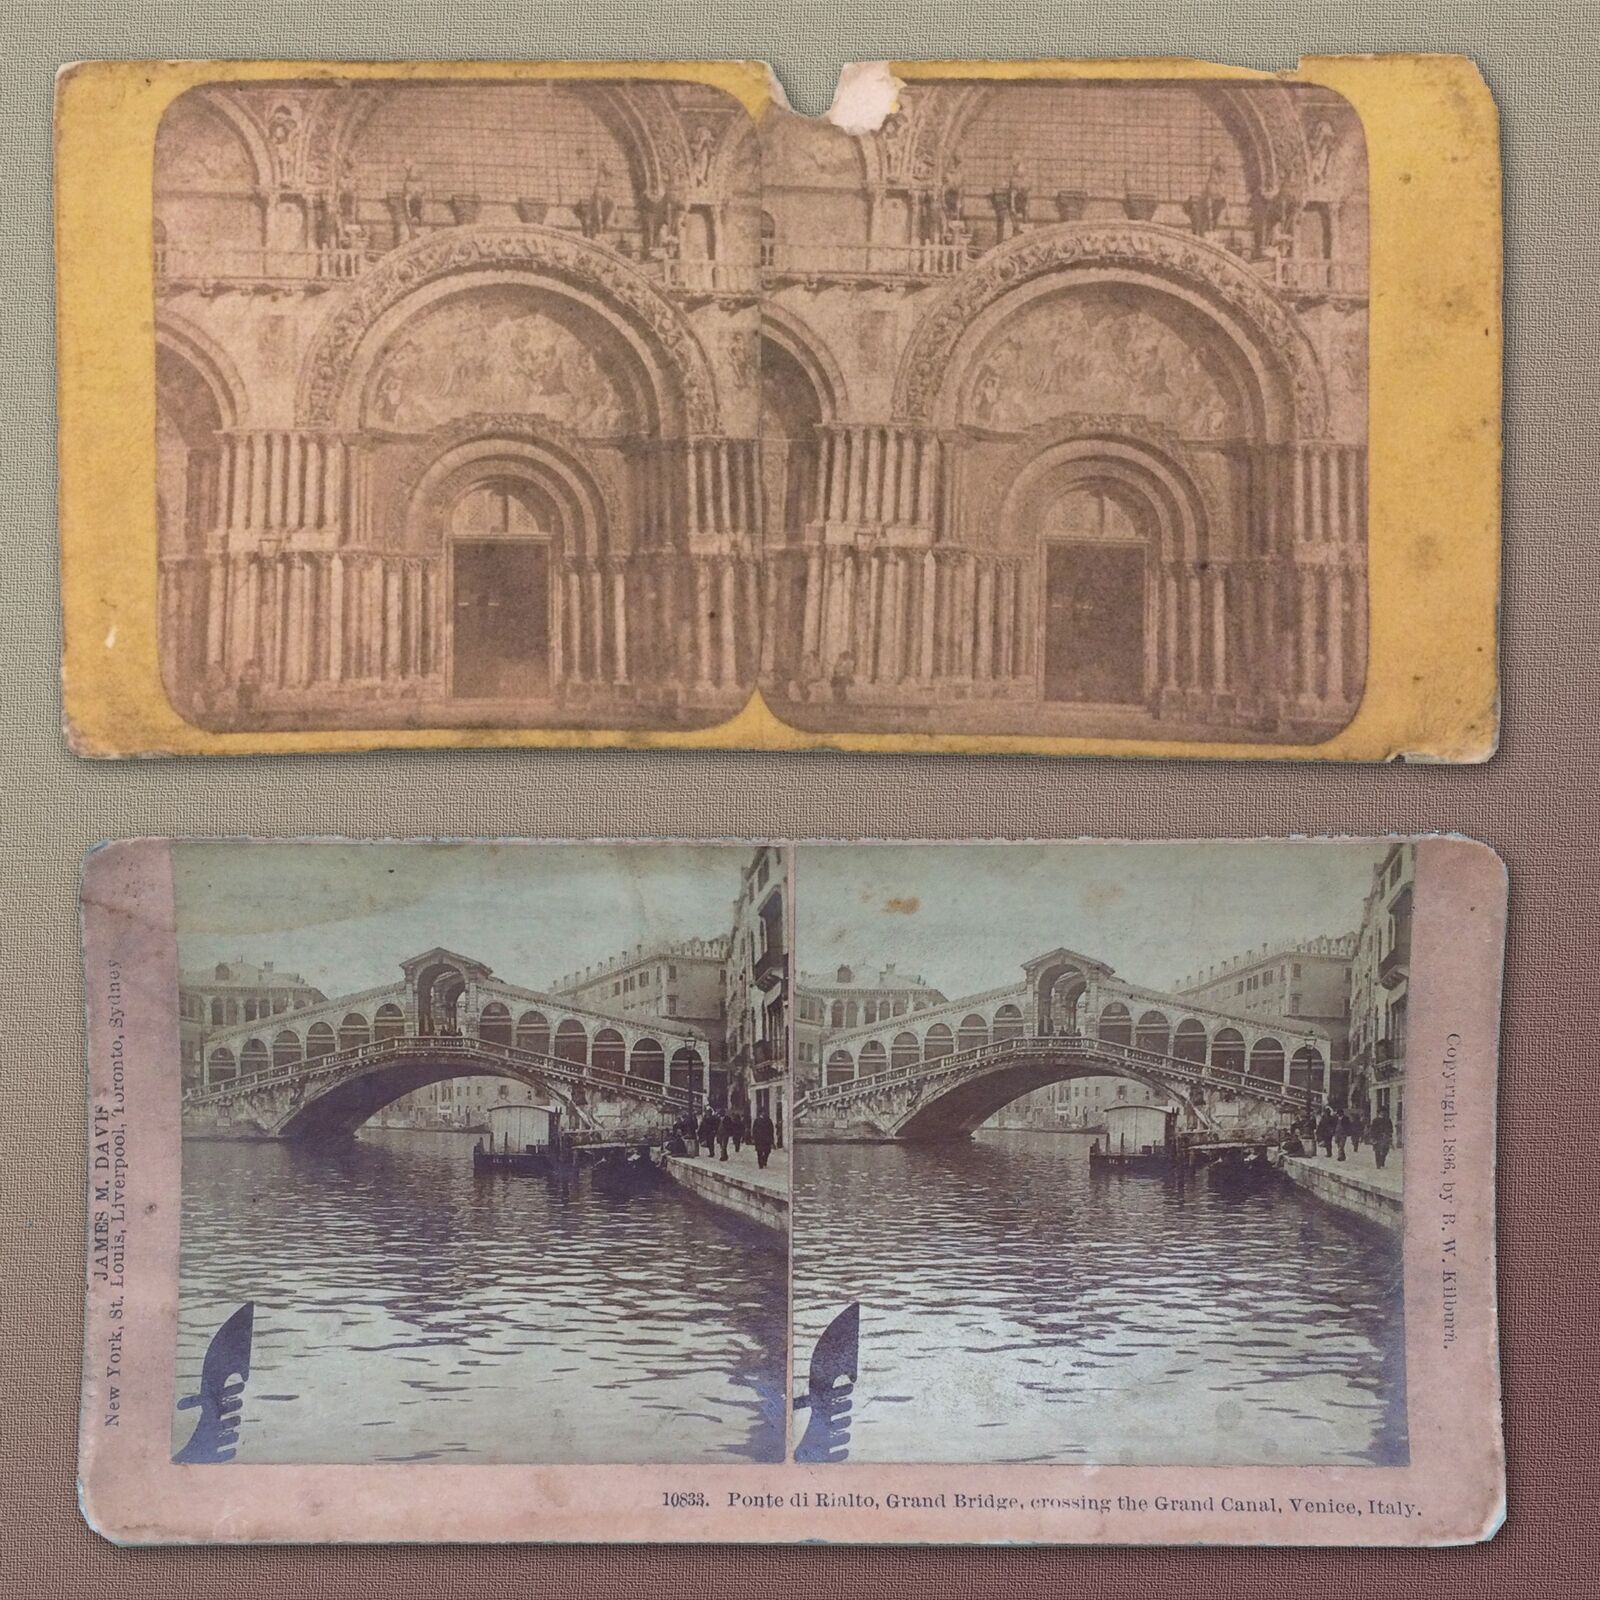 c1895-96 TWO STEREOVIEW PHOTOS ST. MARK'S CATHEDRAL/RIALTO BRIDGE VENICE, ITALY